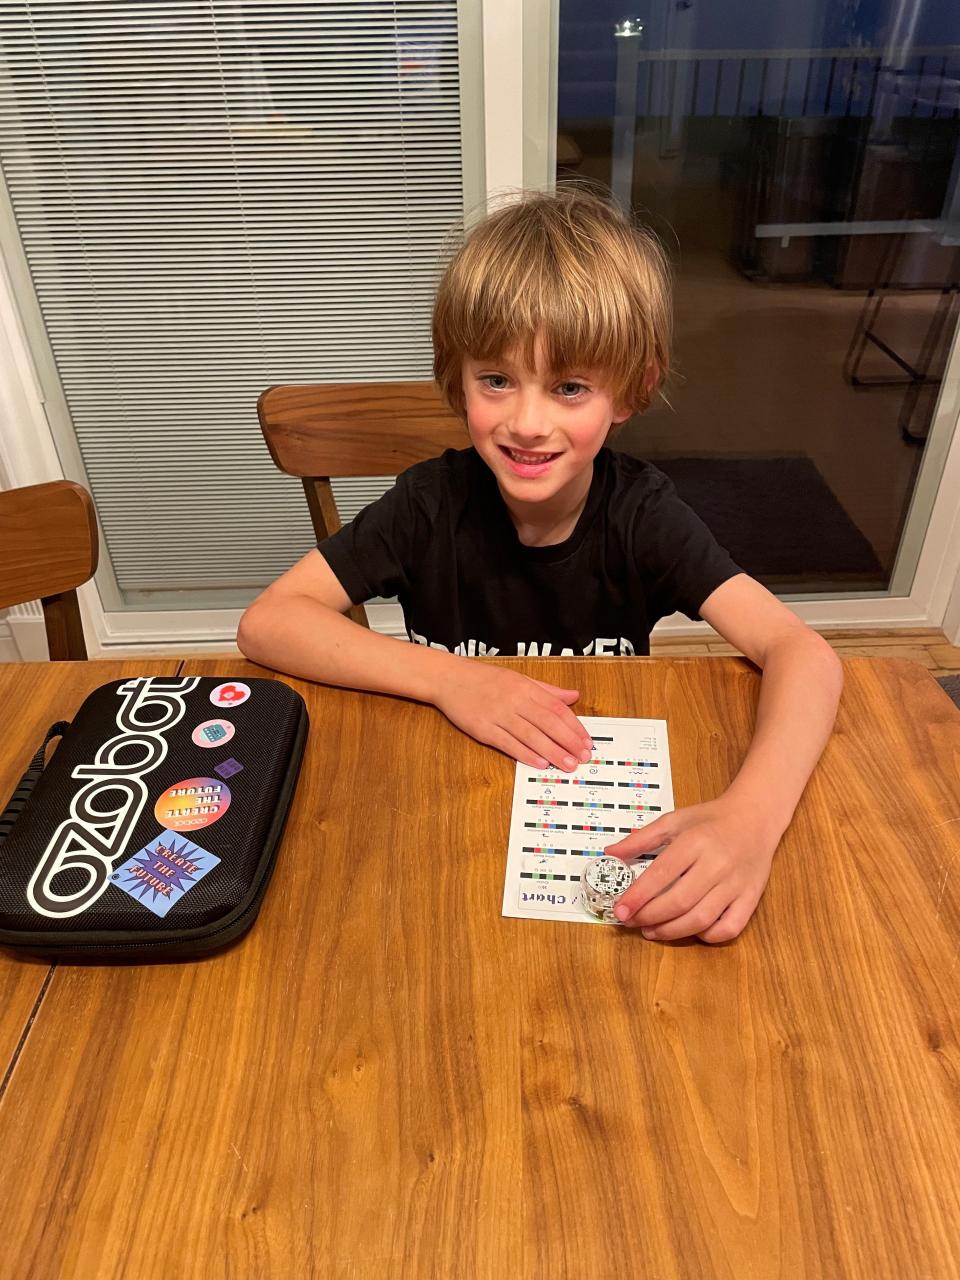 Declan DiGioia, a student in Tecumseh Early Learning Center STEM teacher Amanda Spohn's class, enjoys coding. He said he has learned how to code a path and that his favorite thing about the OzoBot is that it is little and it lights up.